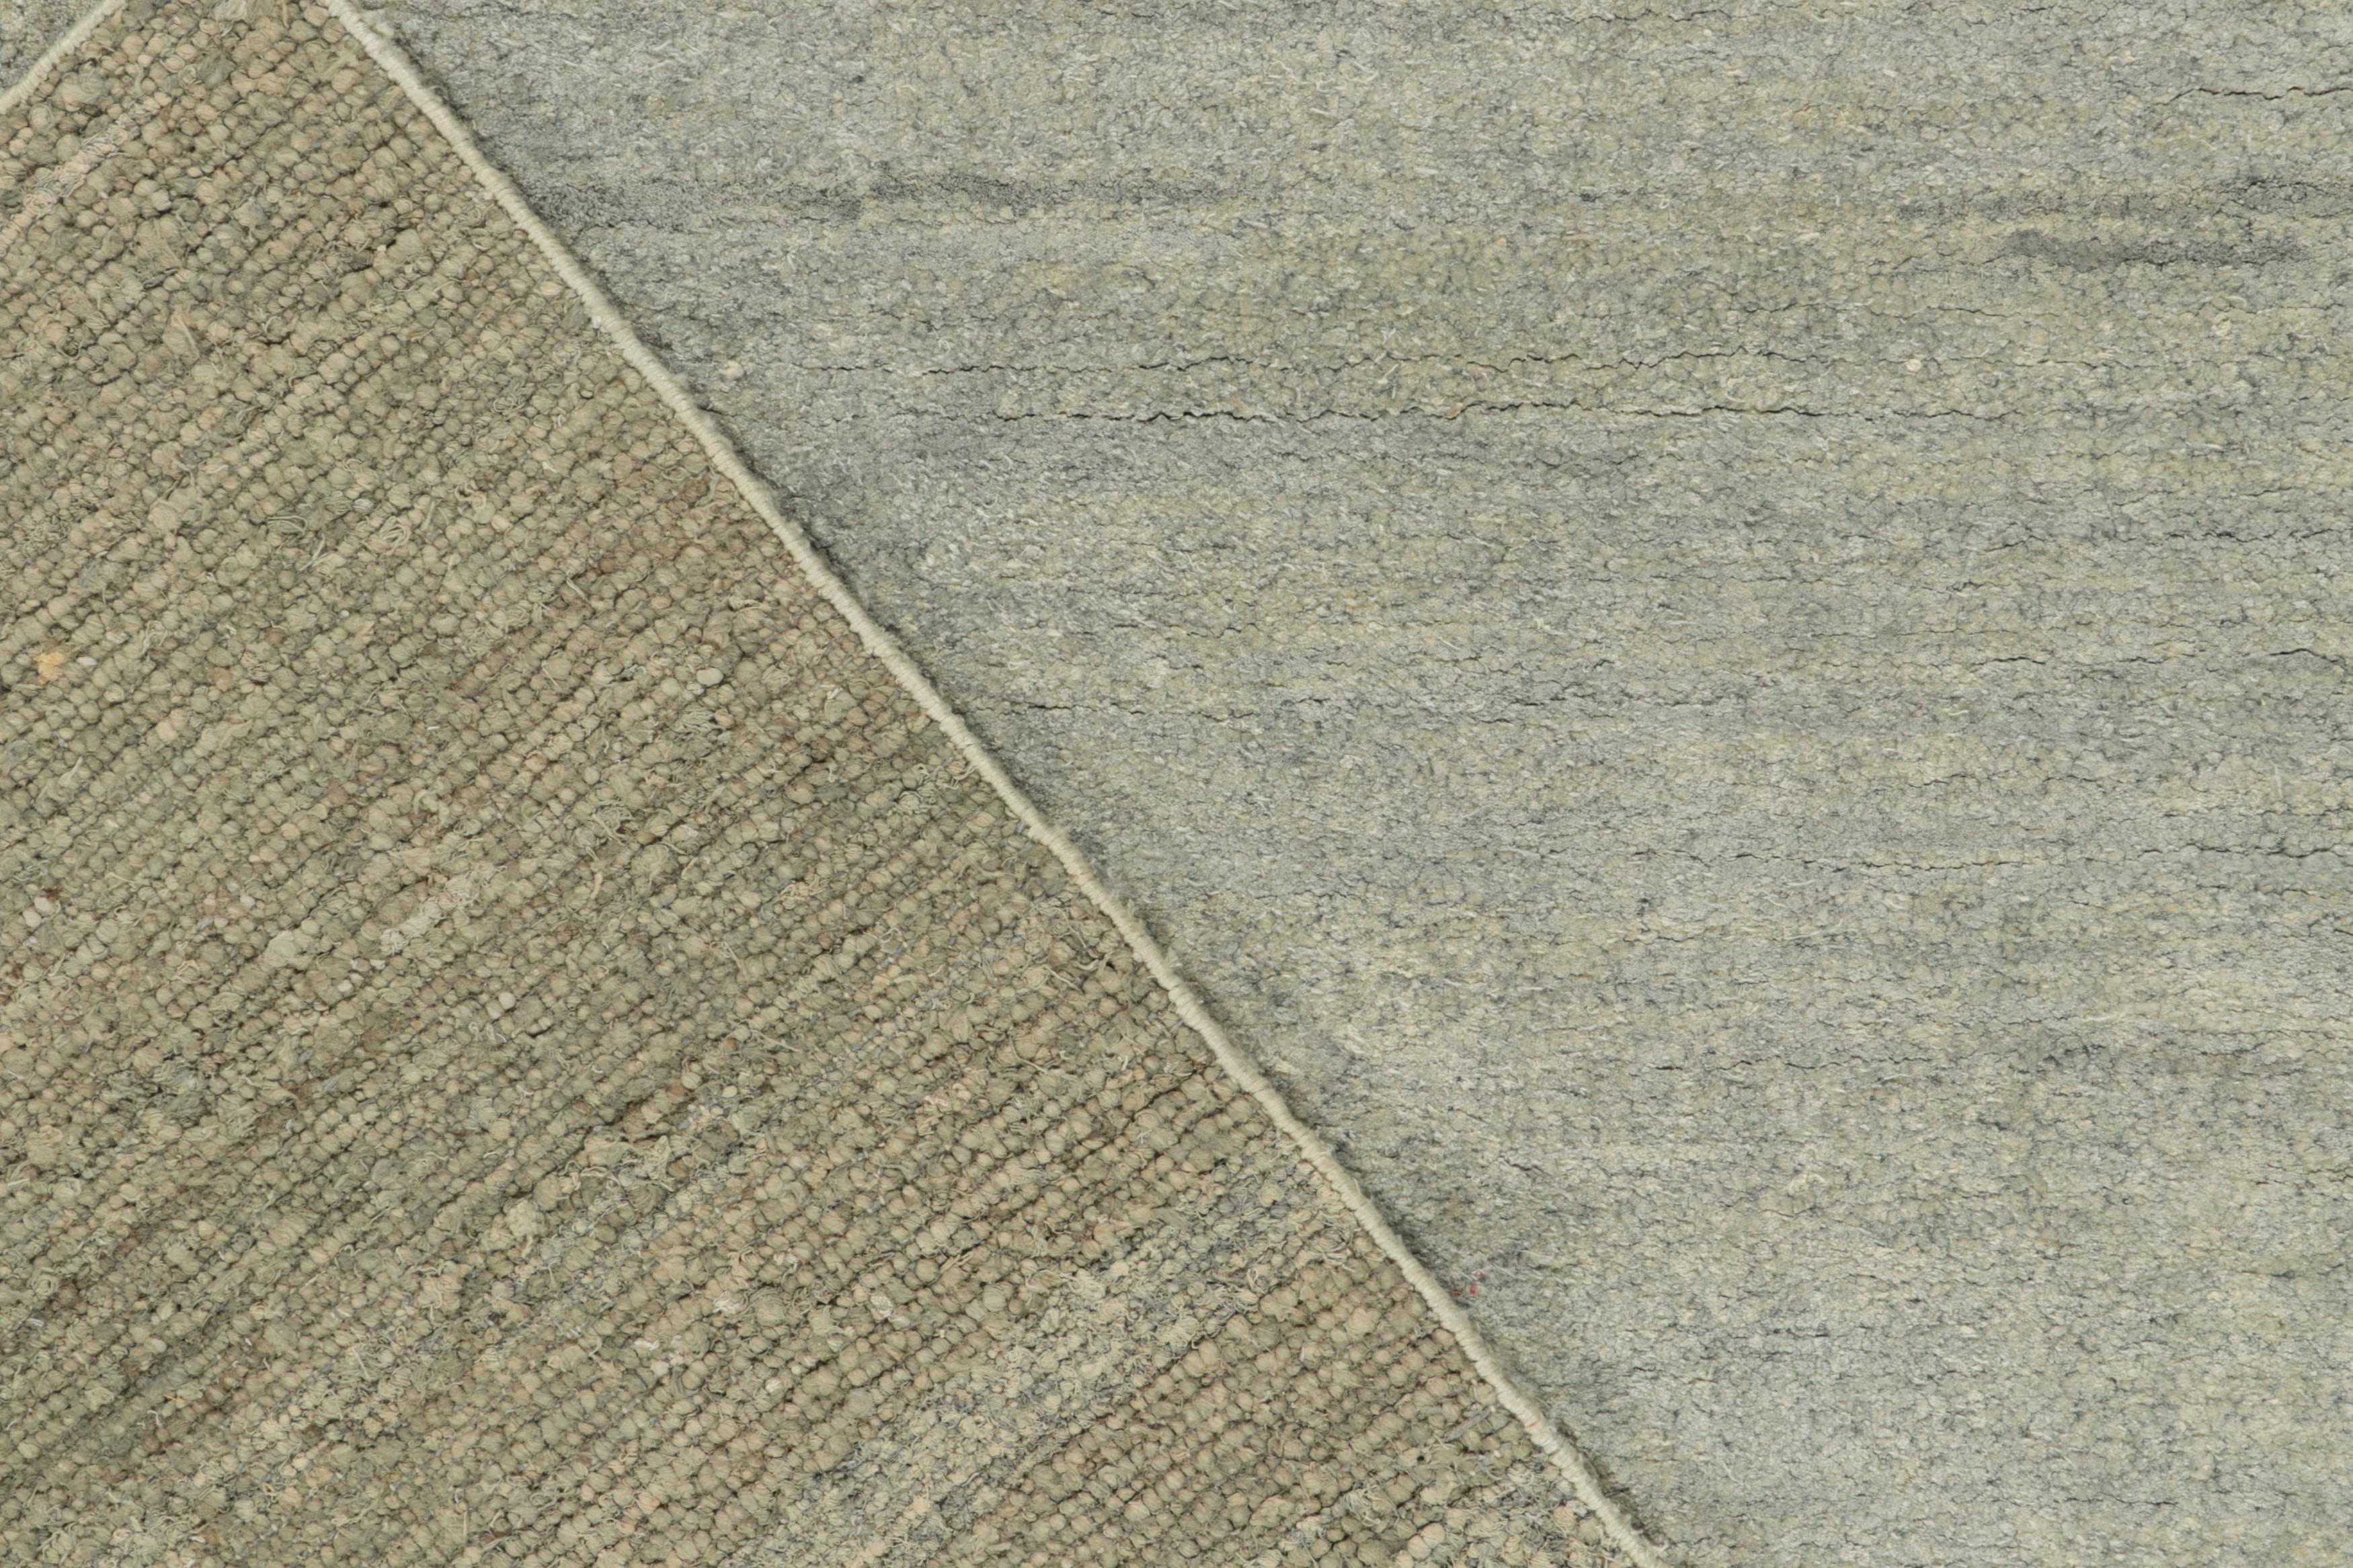 Rug & Kilim’s Contemporary Textural Rug in Gray and Blue Striae, Simple Solid